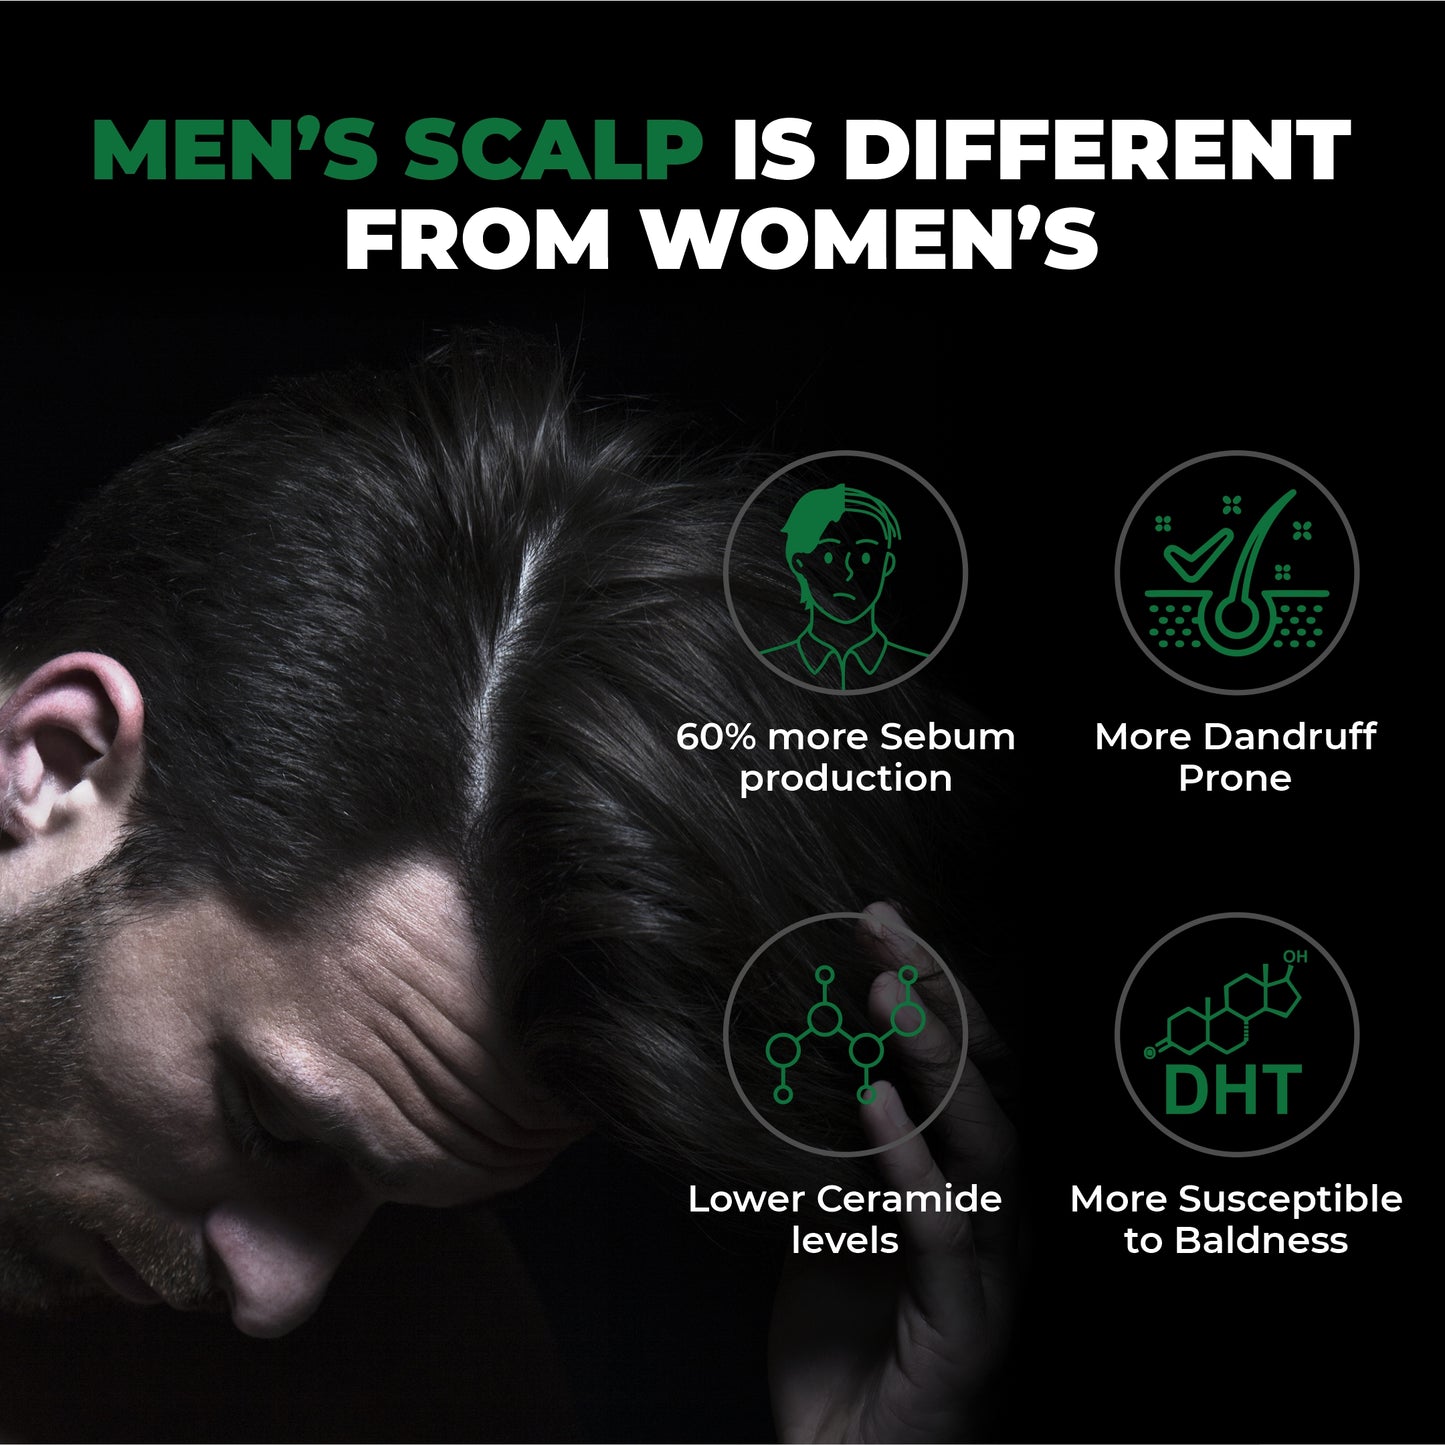 male scalp is different from female scalp